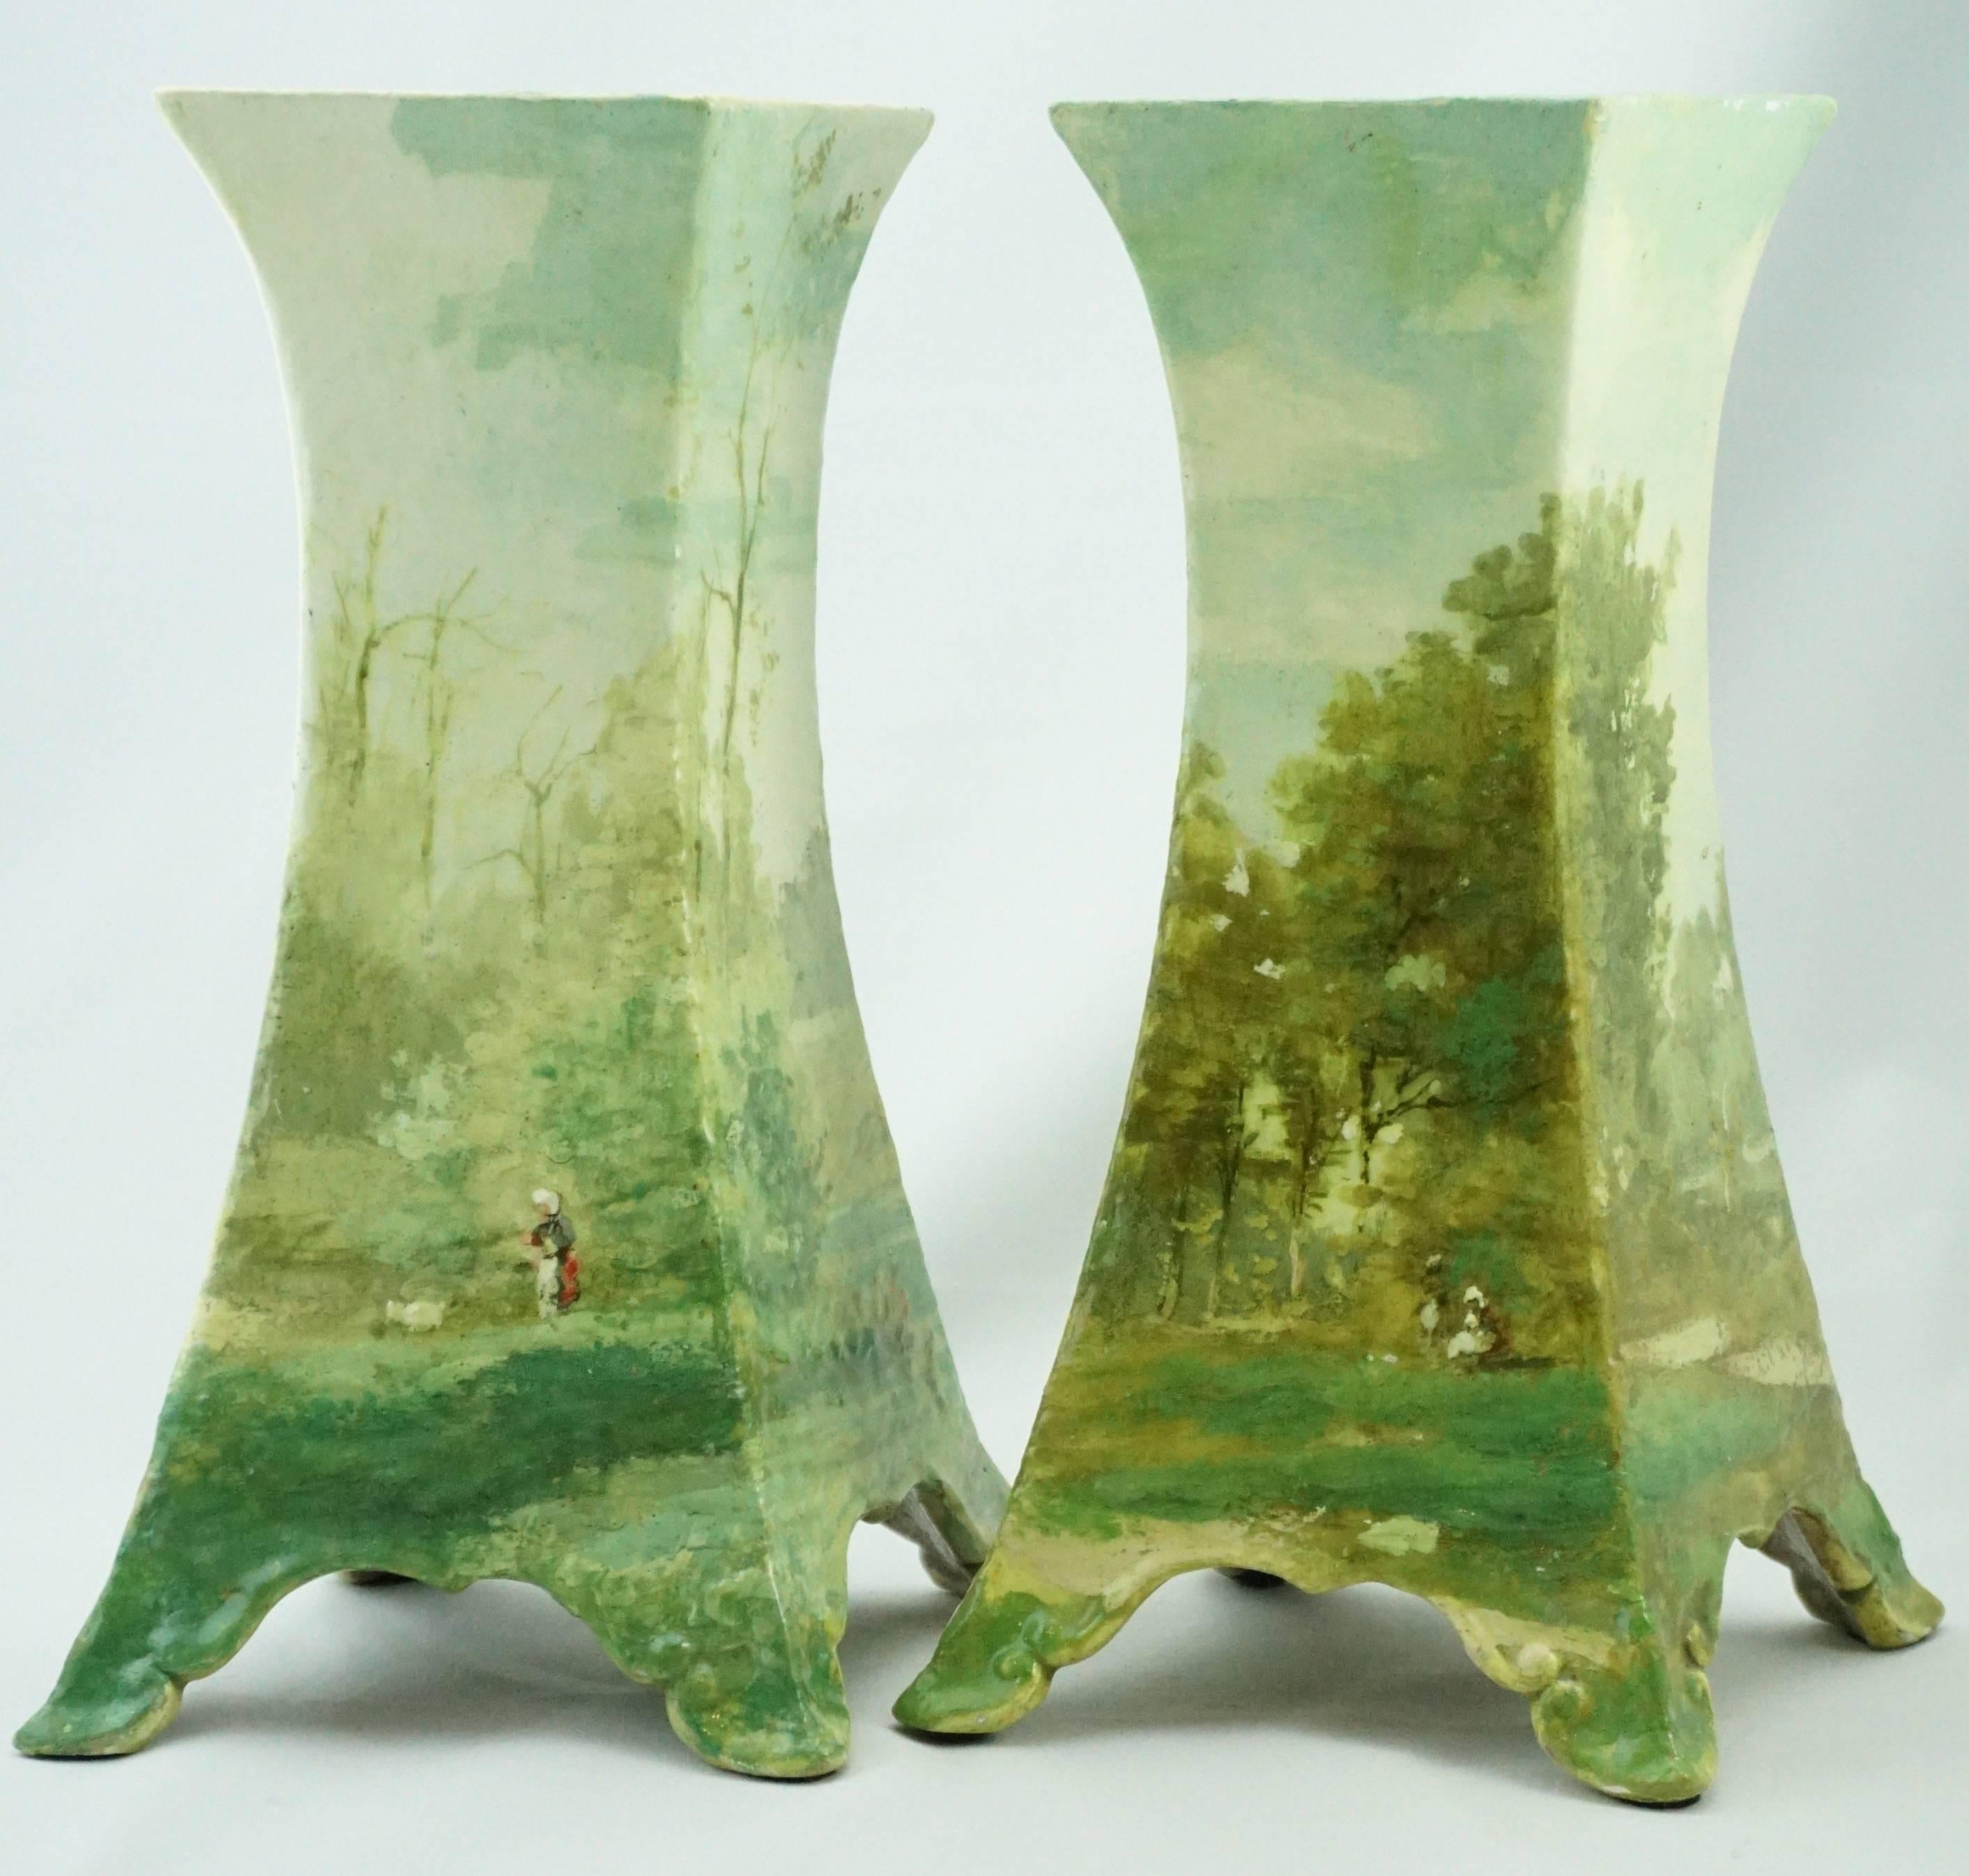 French 19th century Majolica hand-painted enameled impressionist Barbizon landscape paintings with figures in the woods. Absolutely stunningly painted vases. Perfect for your fireplace or display cabinet.

Impressed E.G (Possibly Emile